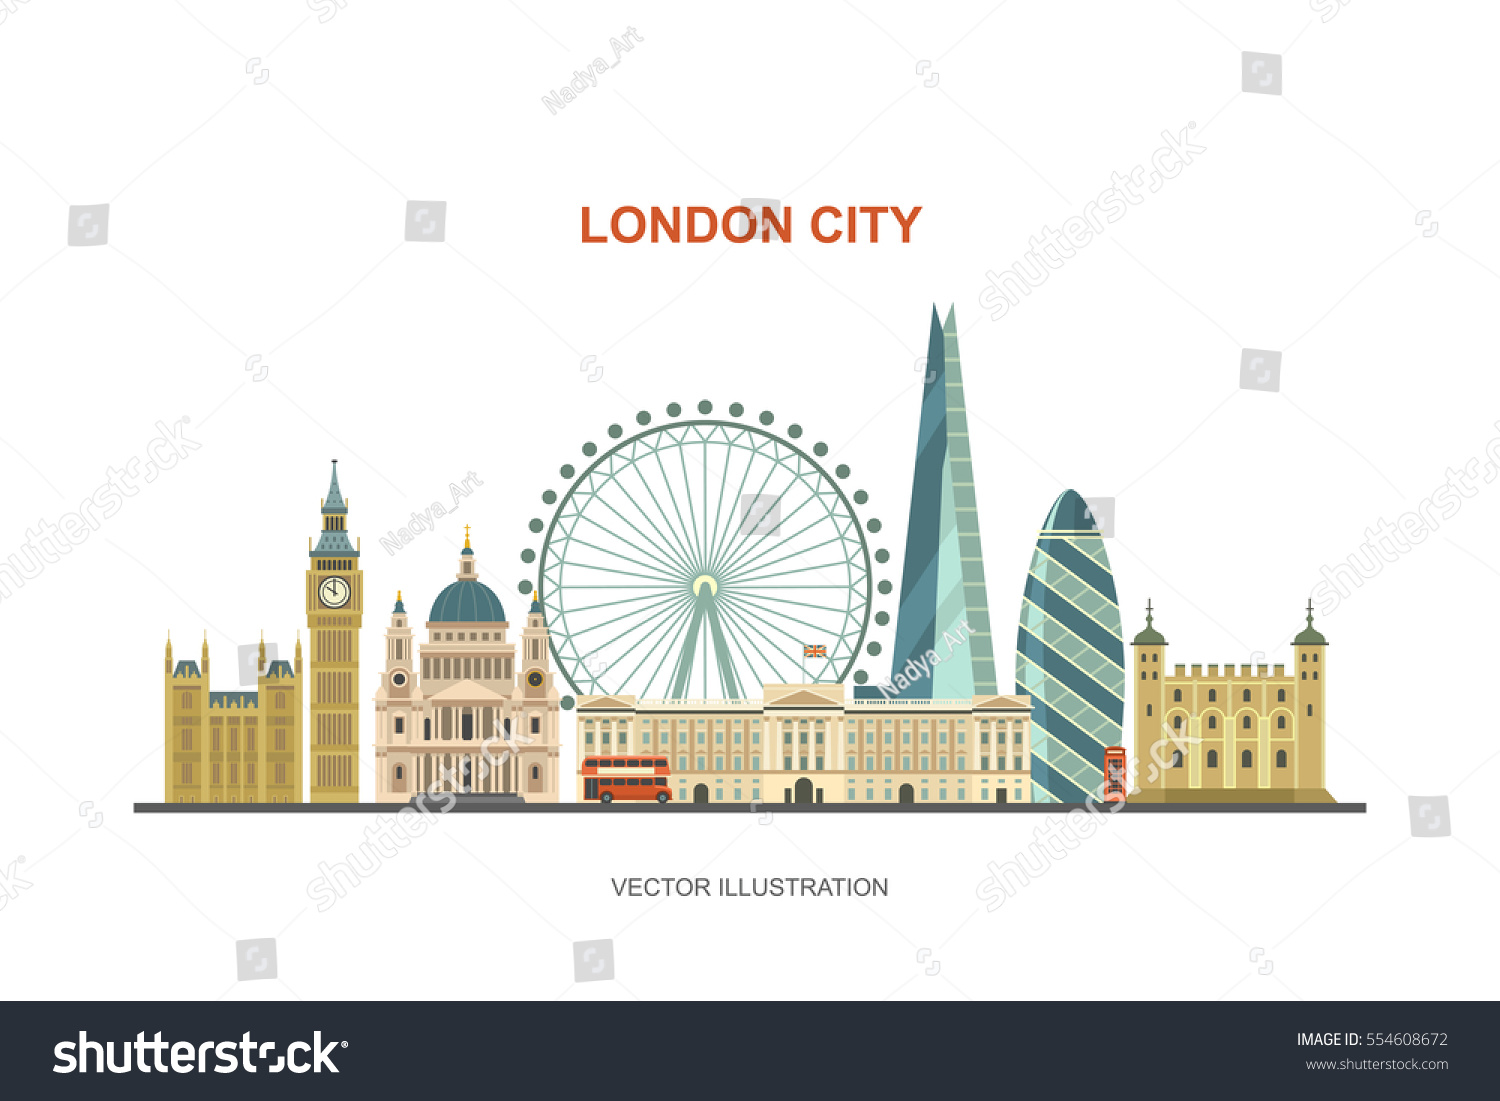 SVG of London city skyline. Vector illustration of most famous London attractions in trendy flat style. Isolated on white background. svg